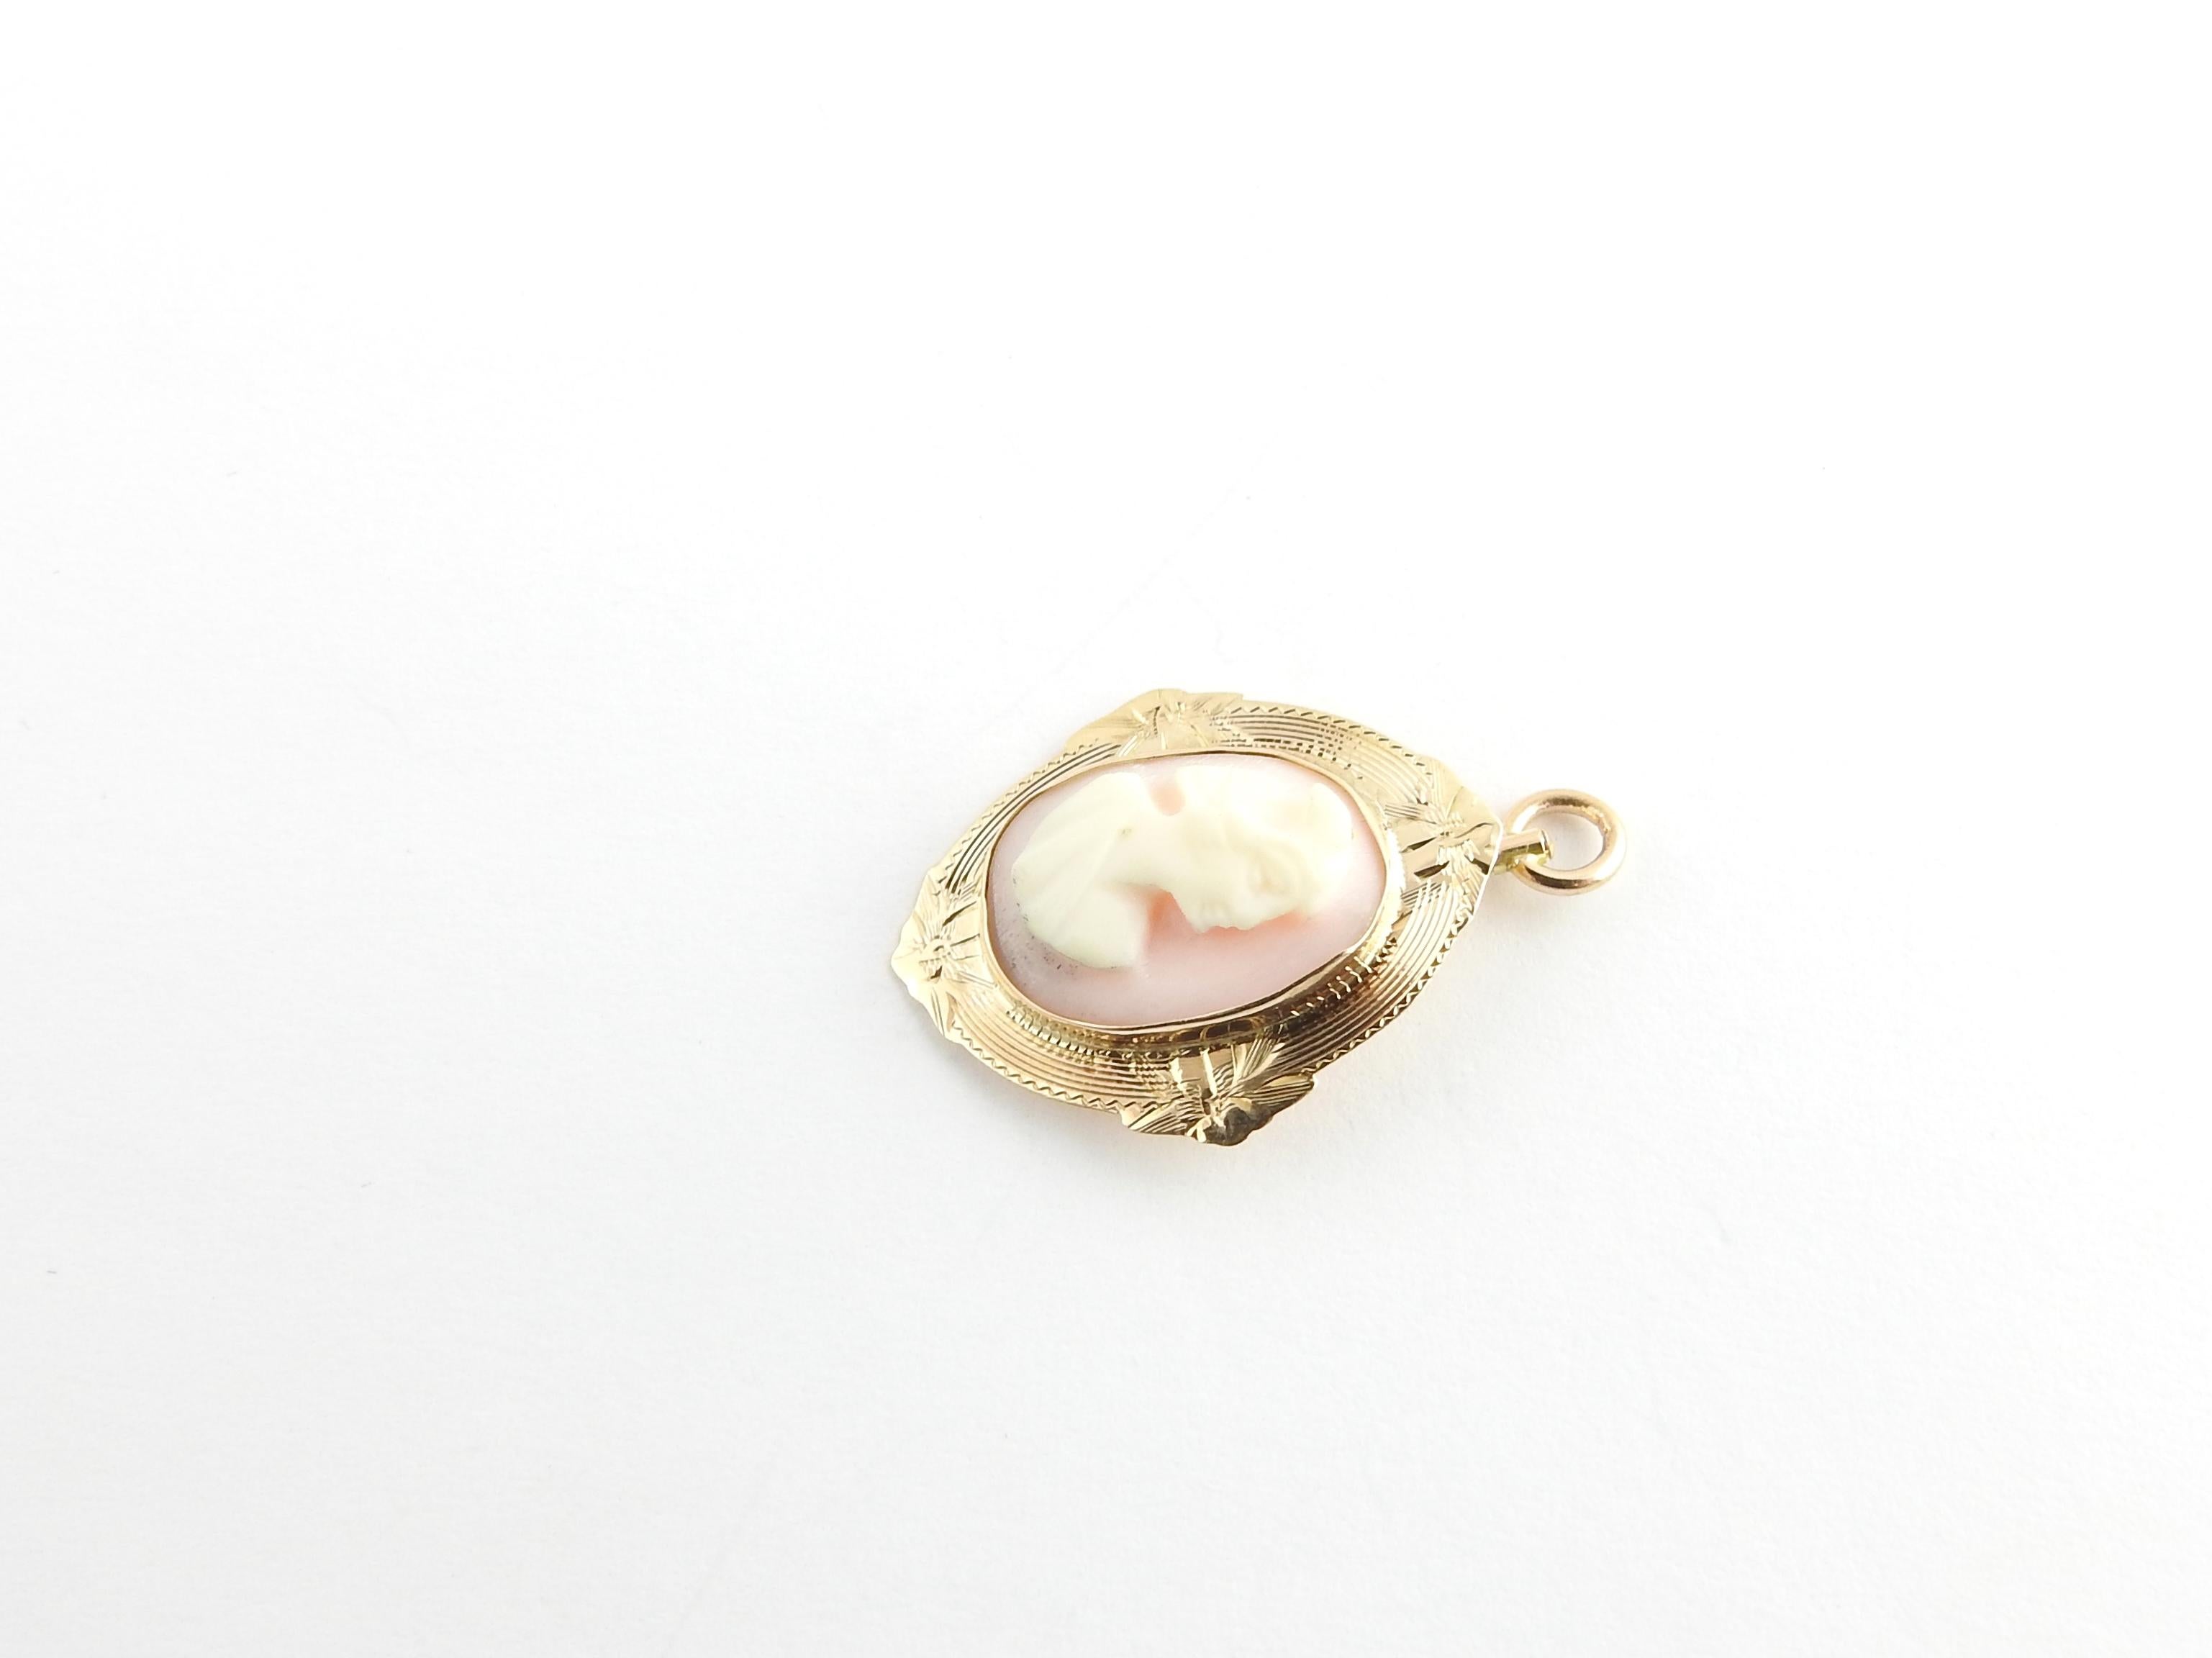 Vintage 14 Karat Yellow Gold Pink Cameo Pendant

This lovely pink cameo features a lovely lady in profile set in beautifully detailed 14K yellow gold.

Size: 25 mm x 17 mm

Weight: 0.9 dwt. / 1.5 gr.

Acid tested for 14K gold.

Very good condition,